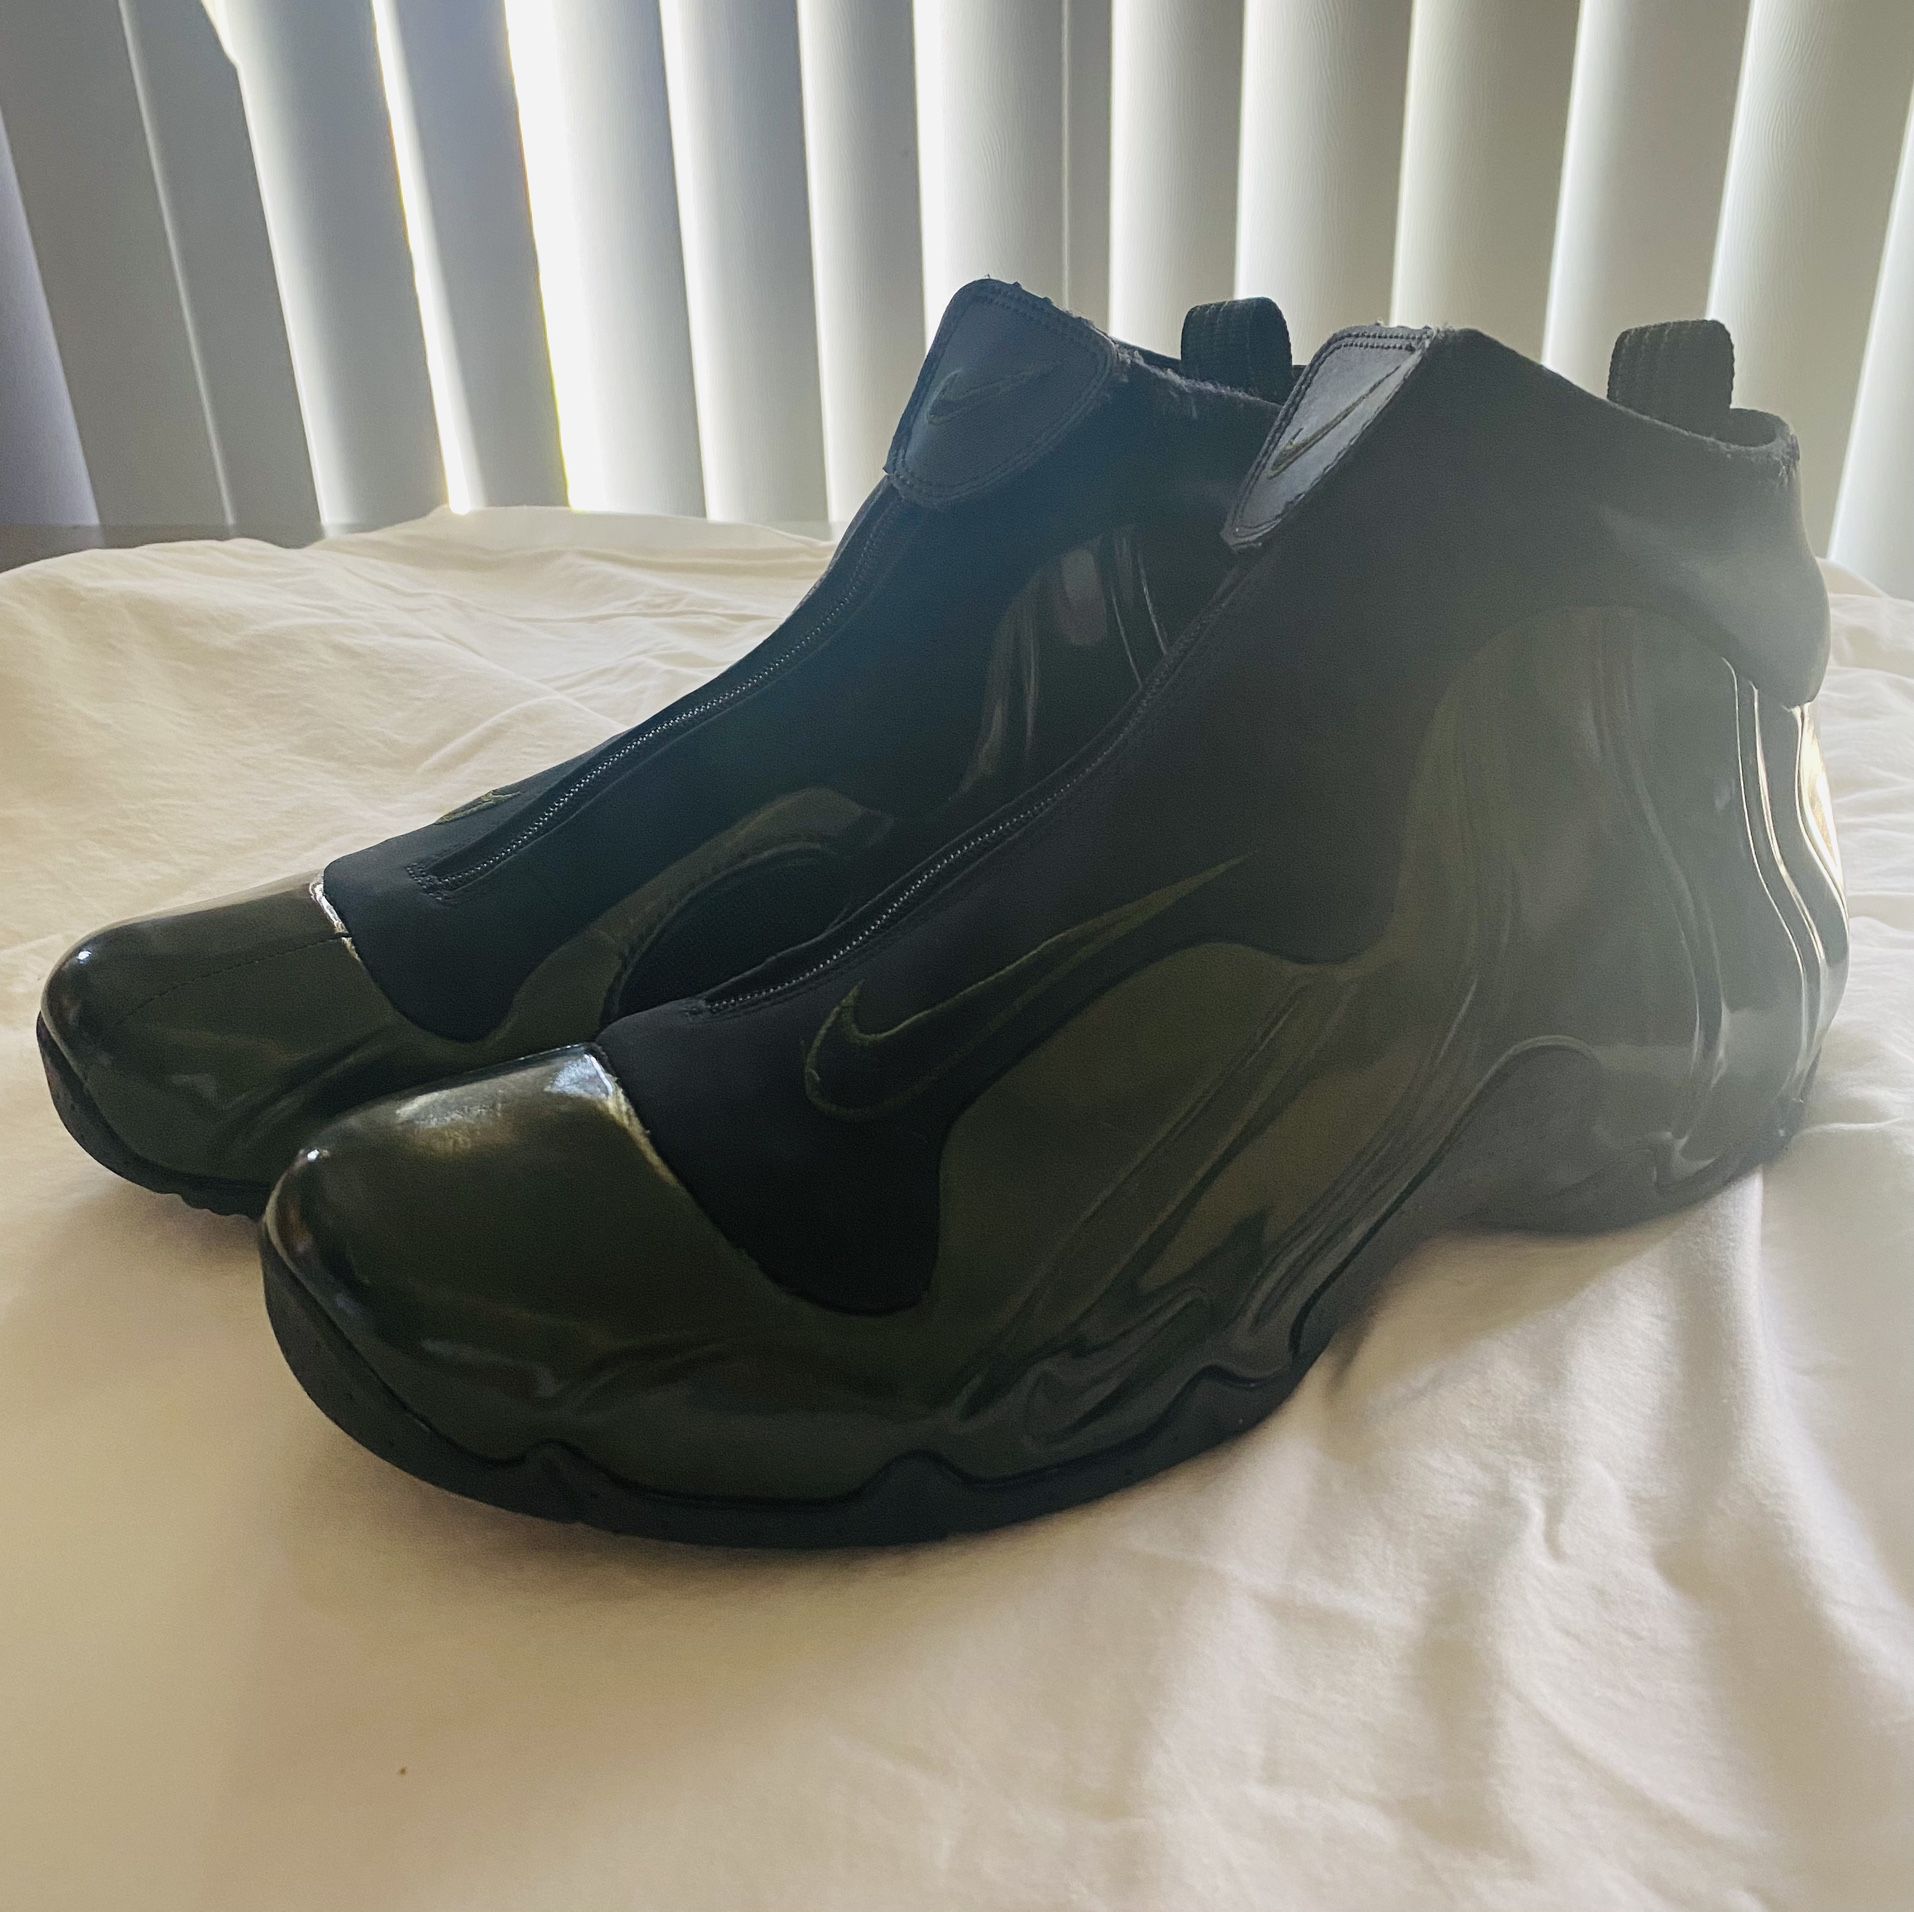 Nike Air max 720 for Sale in Queens, NY - OfferUp